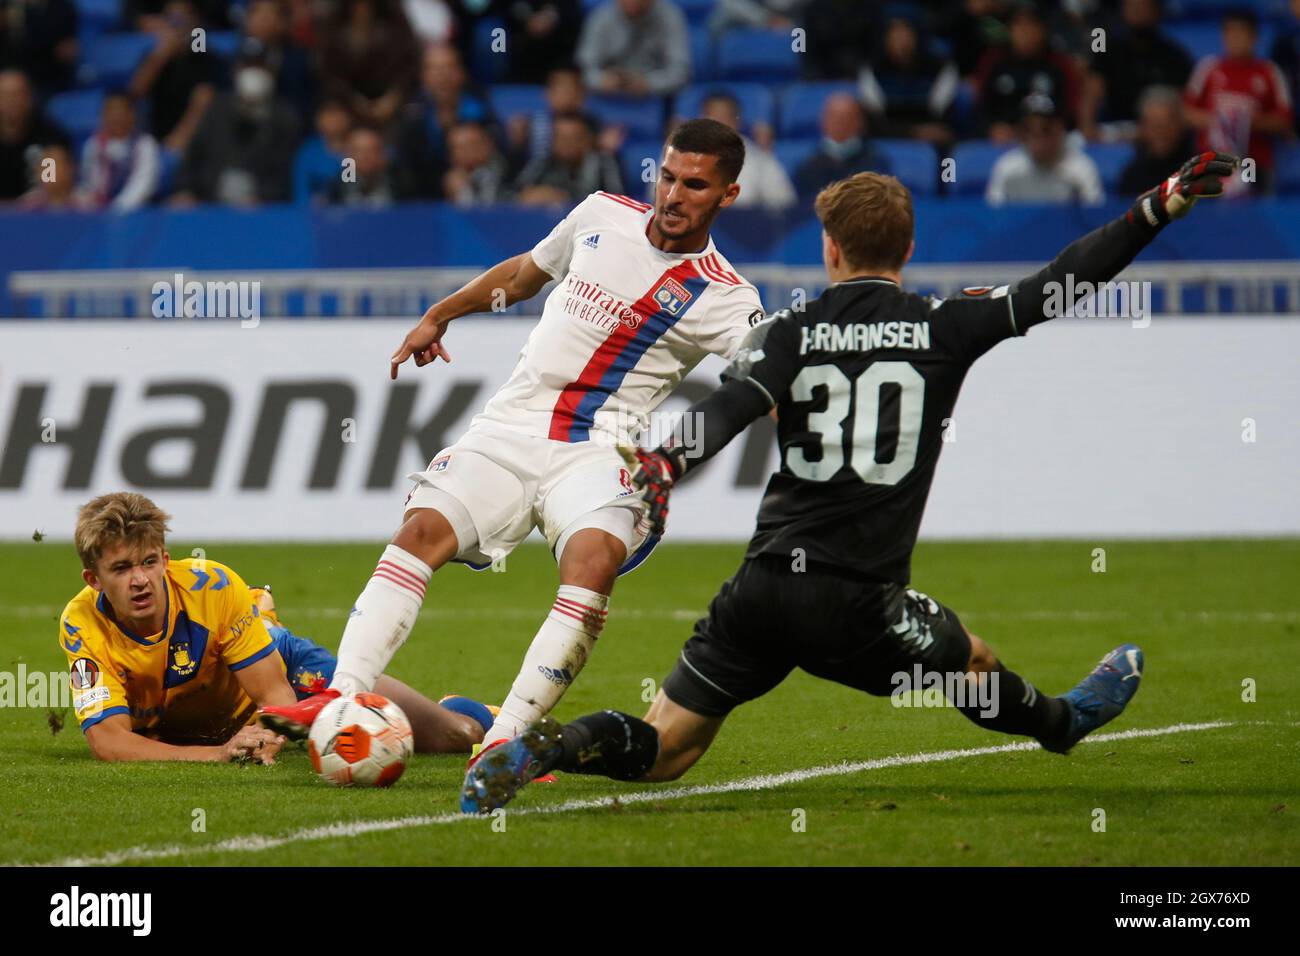 Houssem AOUAR of Lyon and Mads HERMANSEN of Brondby and Henrik HEGGHEIM of  Brondby during the UEFA Europa League, Group A football match between  Olympique Lyonnais and Brondby IF on September 30,